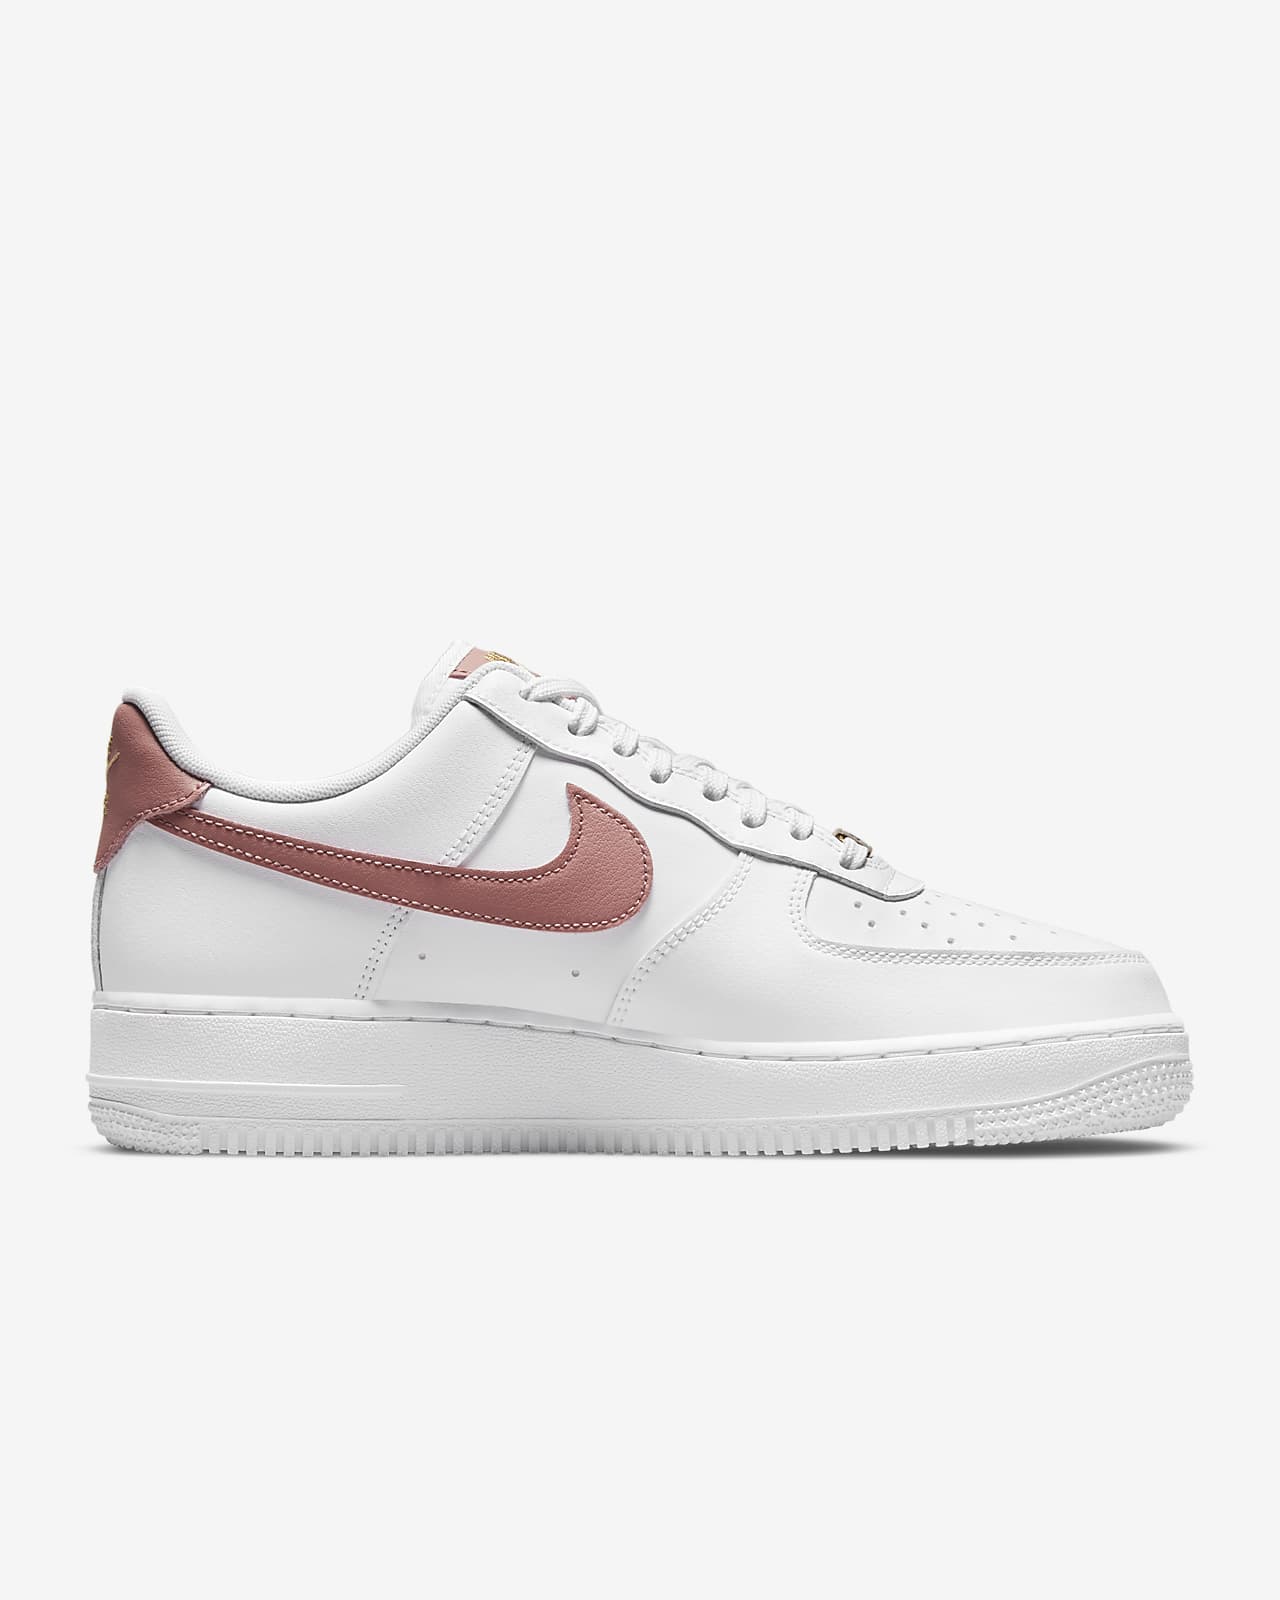 nike air force 1 womens best price